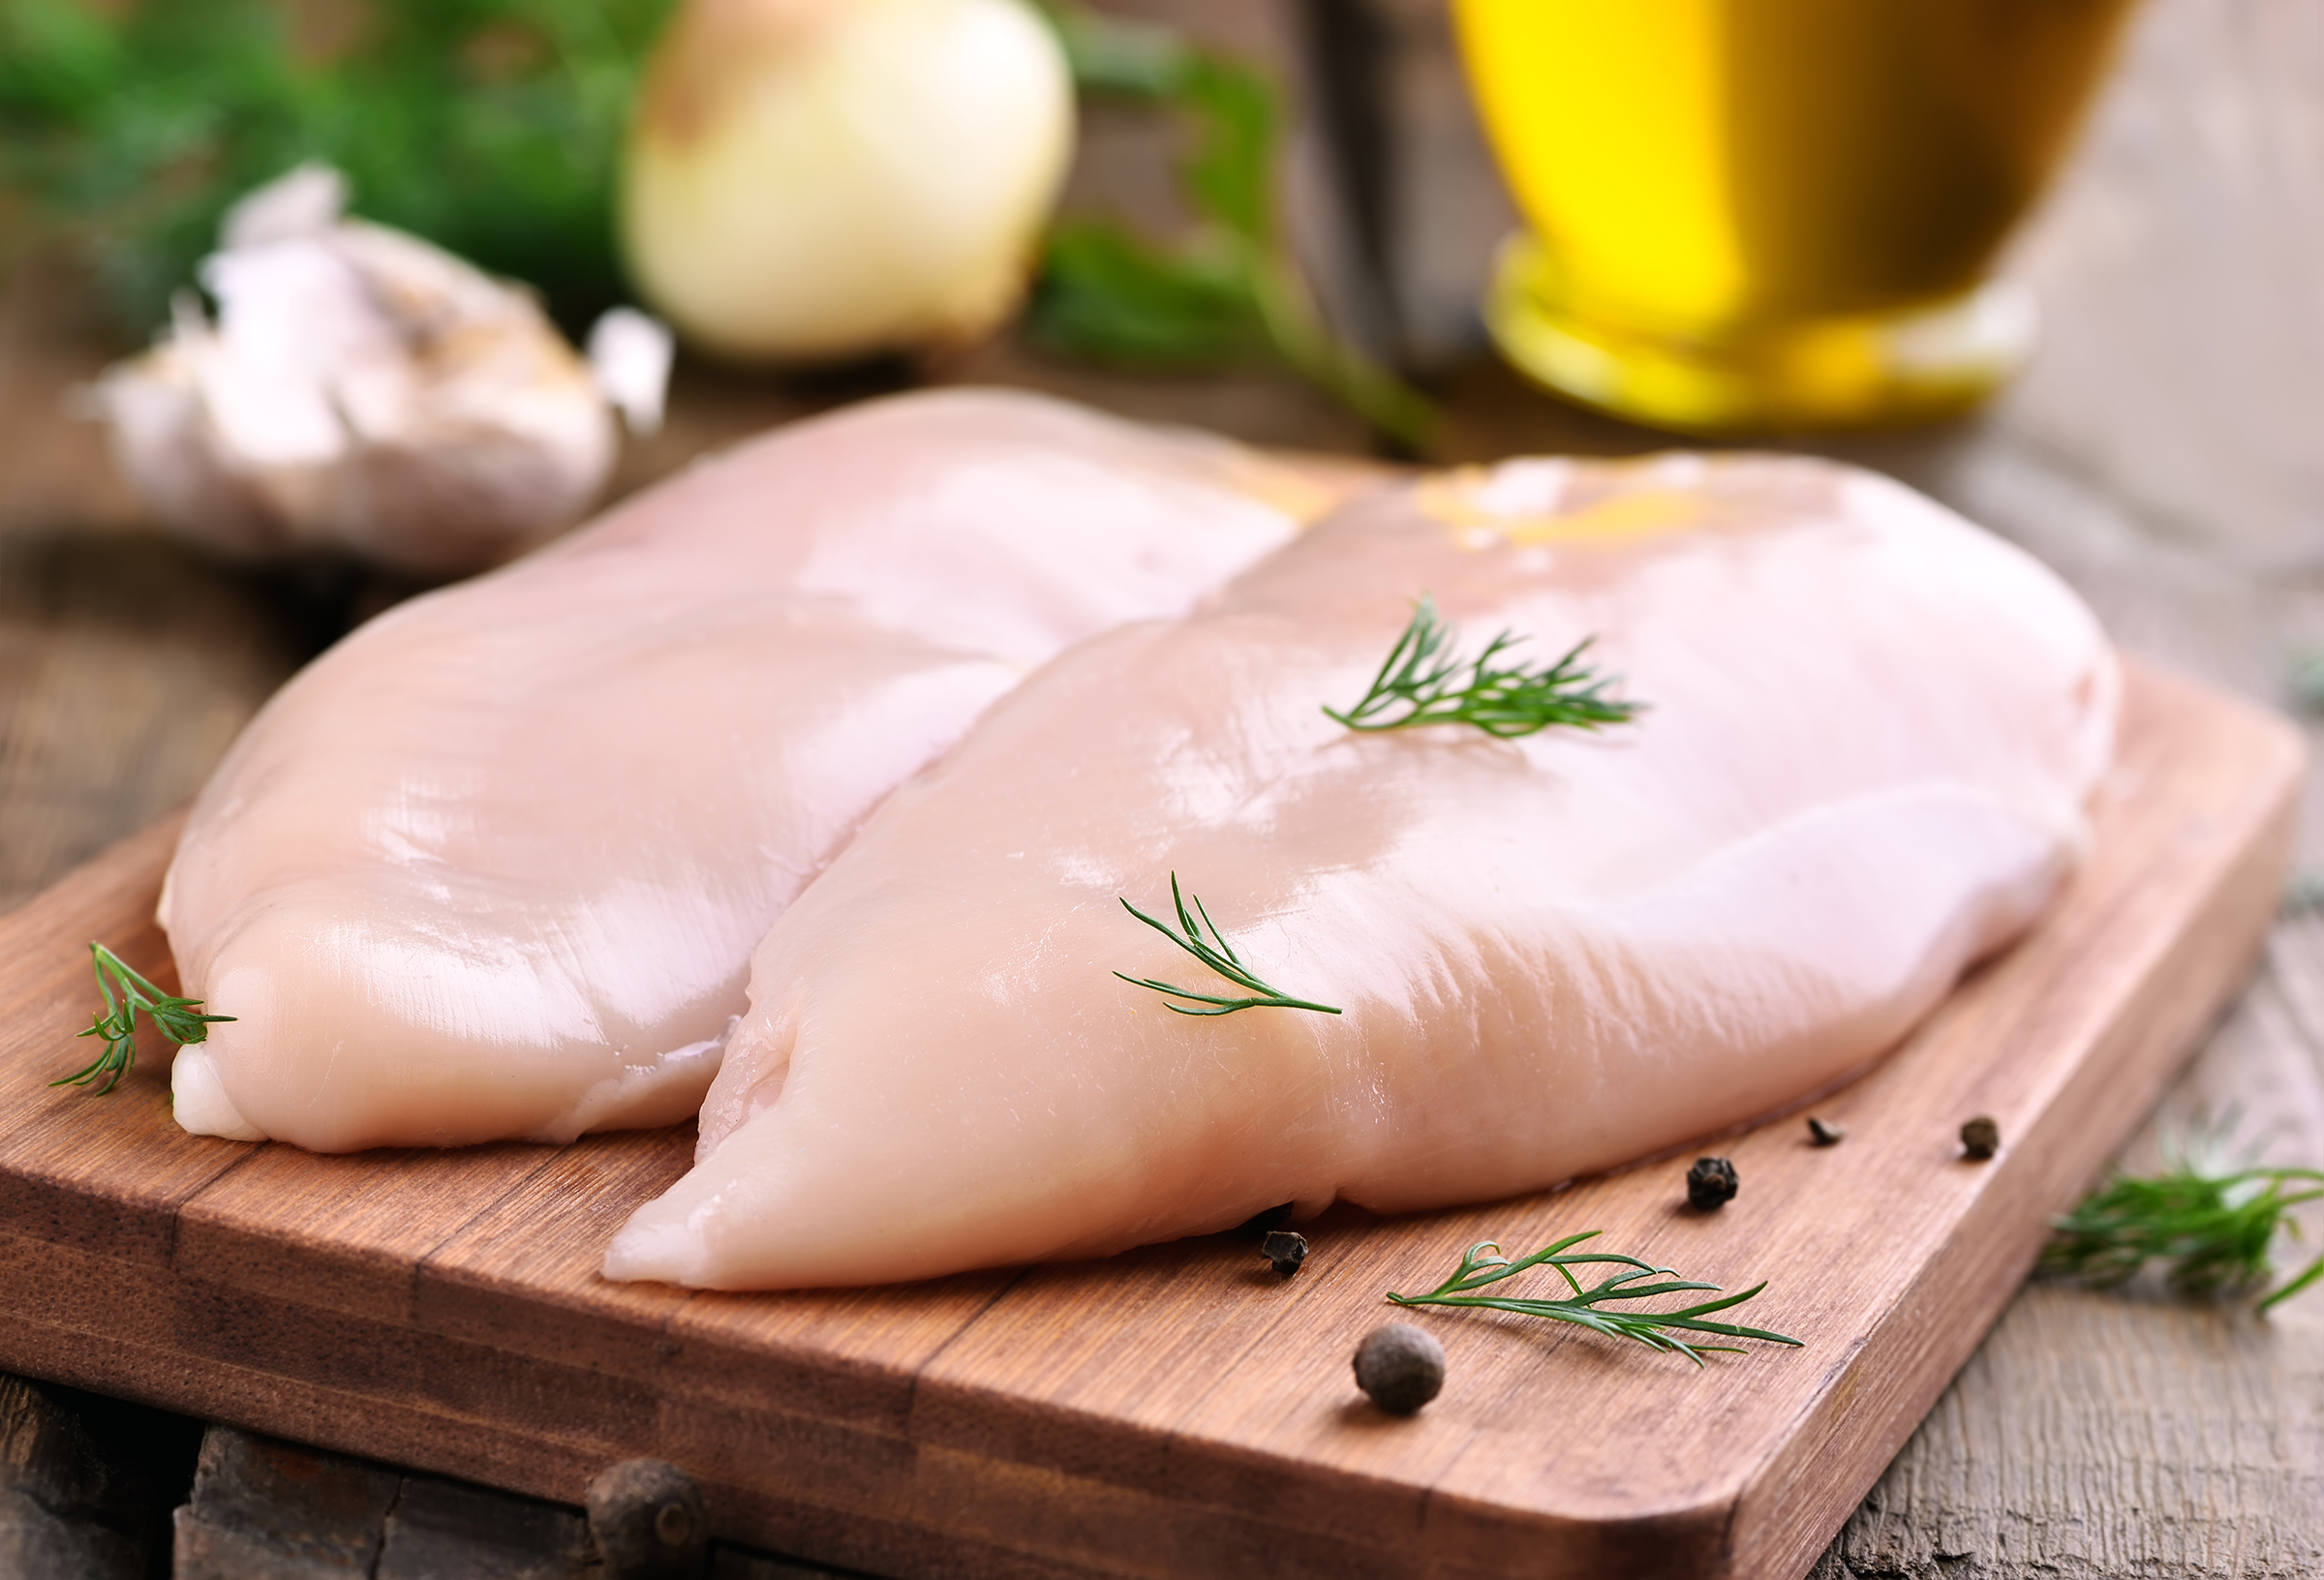 The 5 things poultry processors should know about food safety